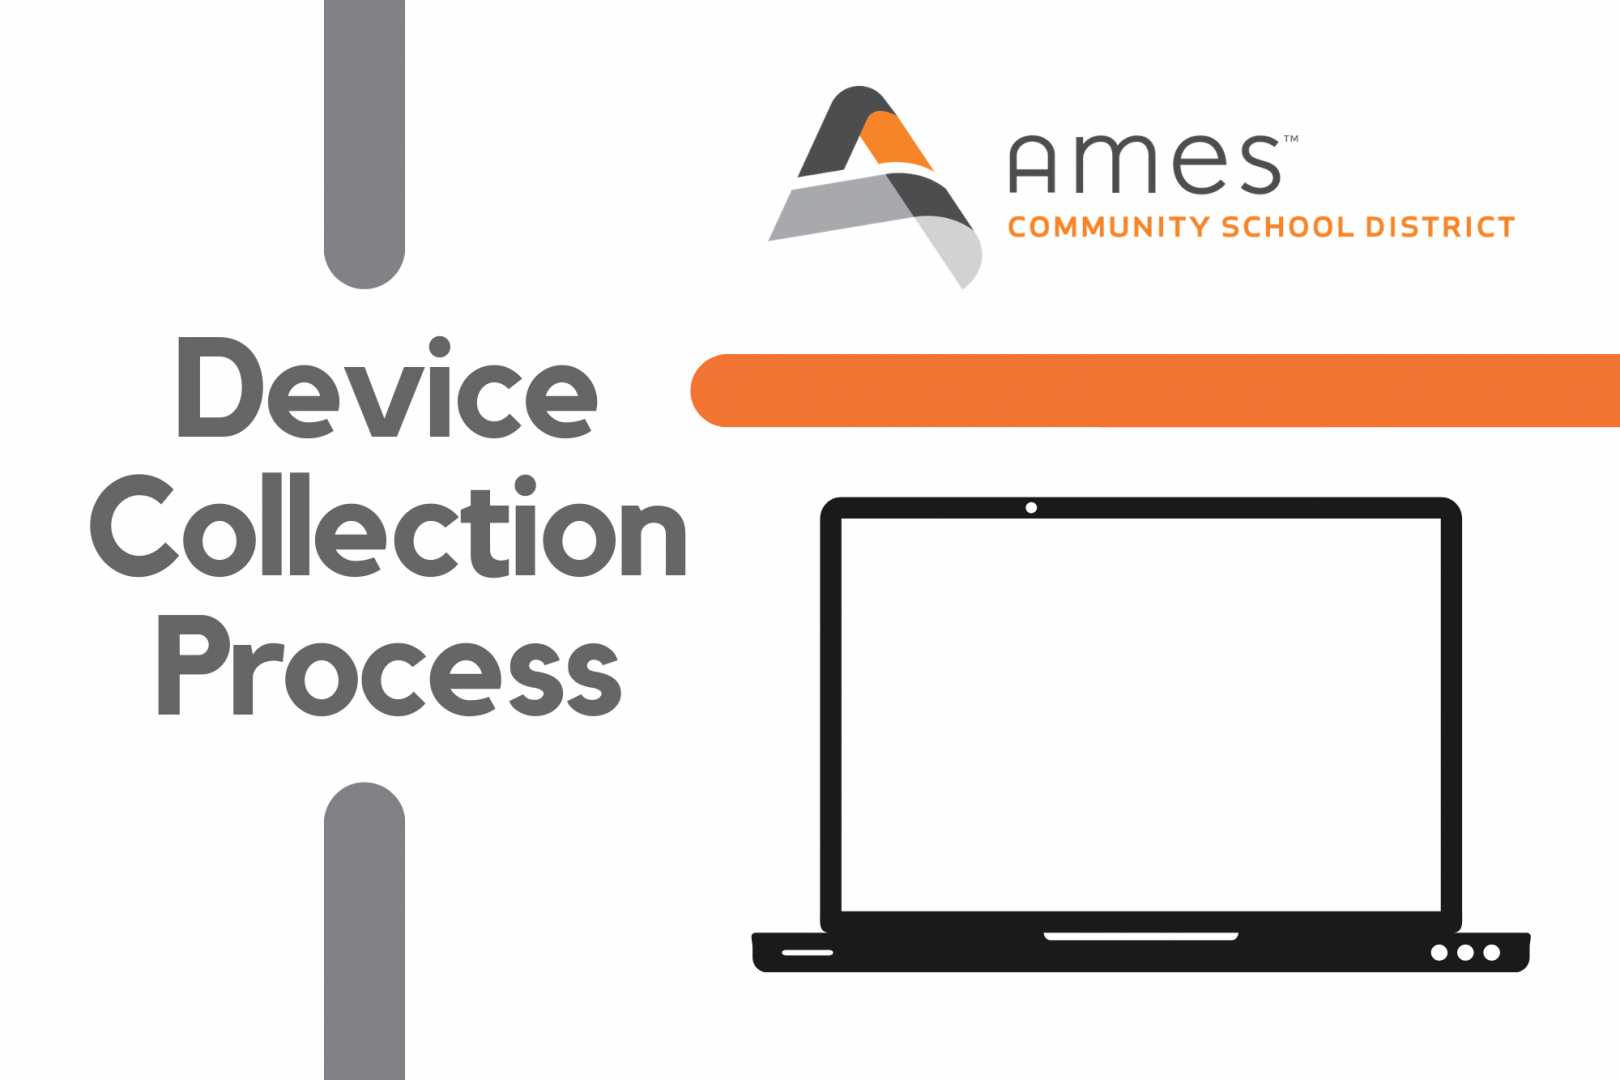 Device Collection Process